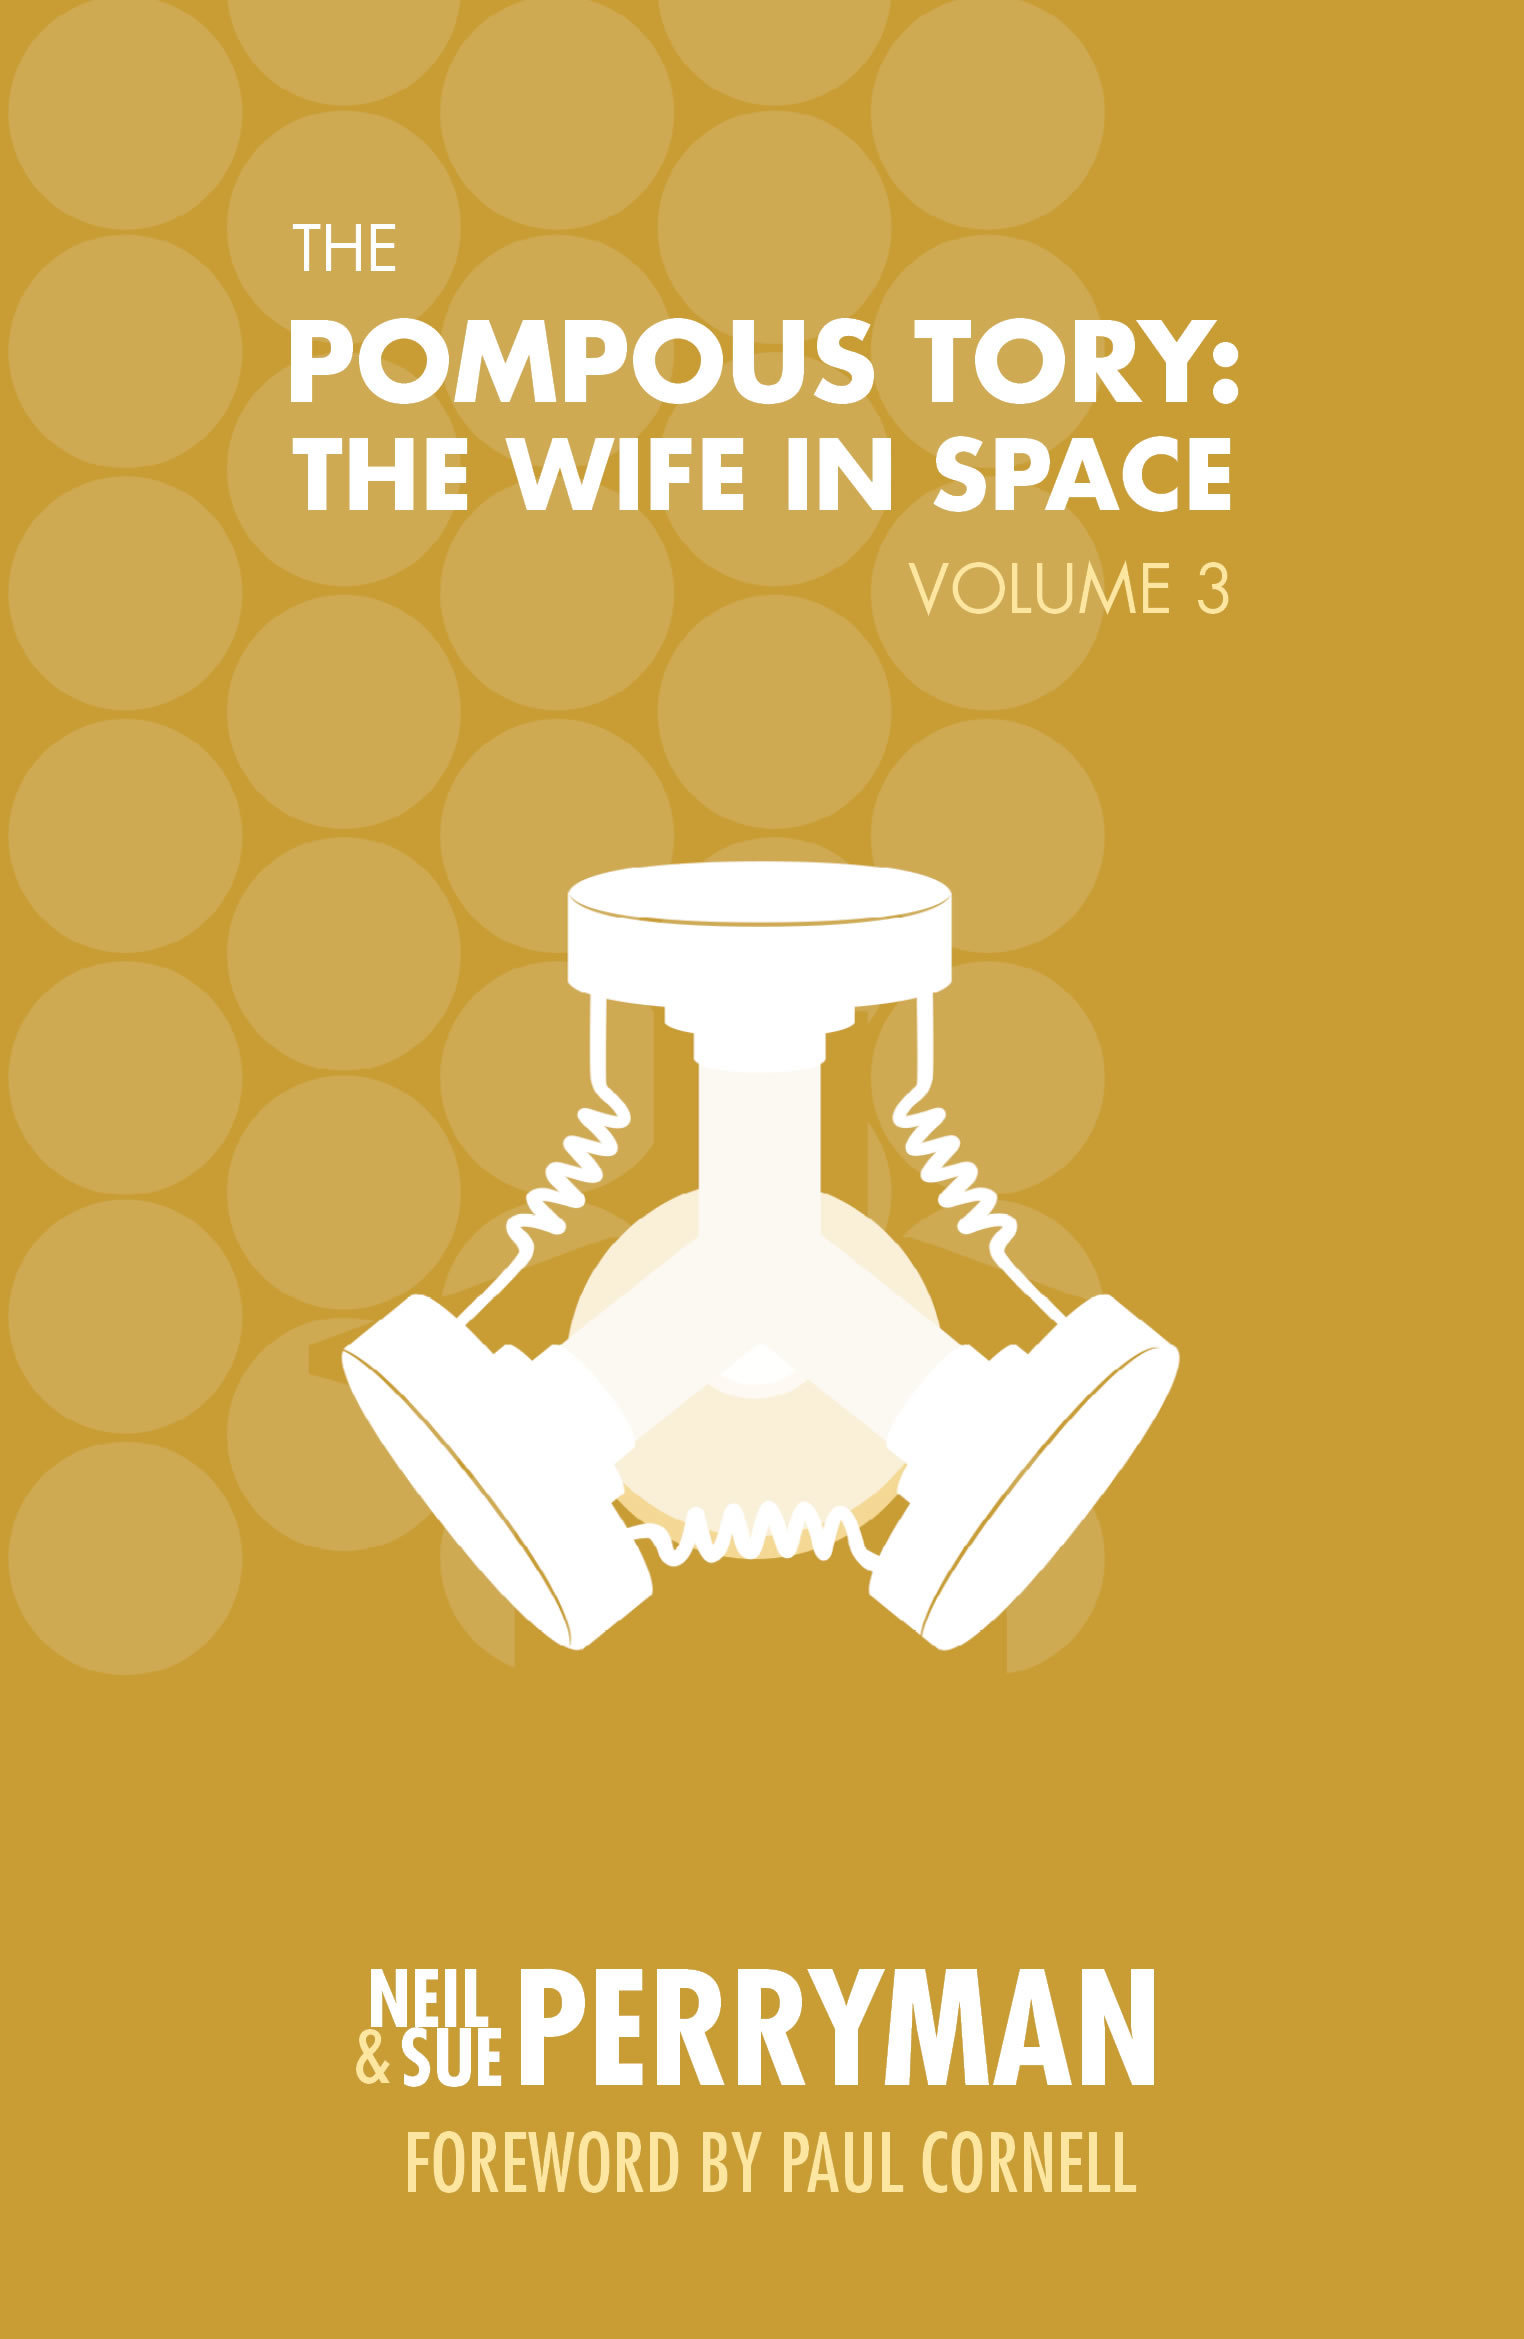 Neil Perryman, Sue Perryman: The Pompous Tory: The Wife in Space, Volume 3 (EBook, Sue Me Books)